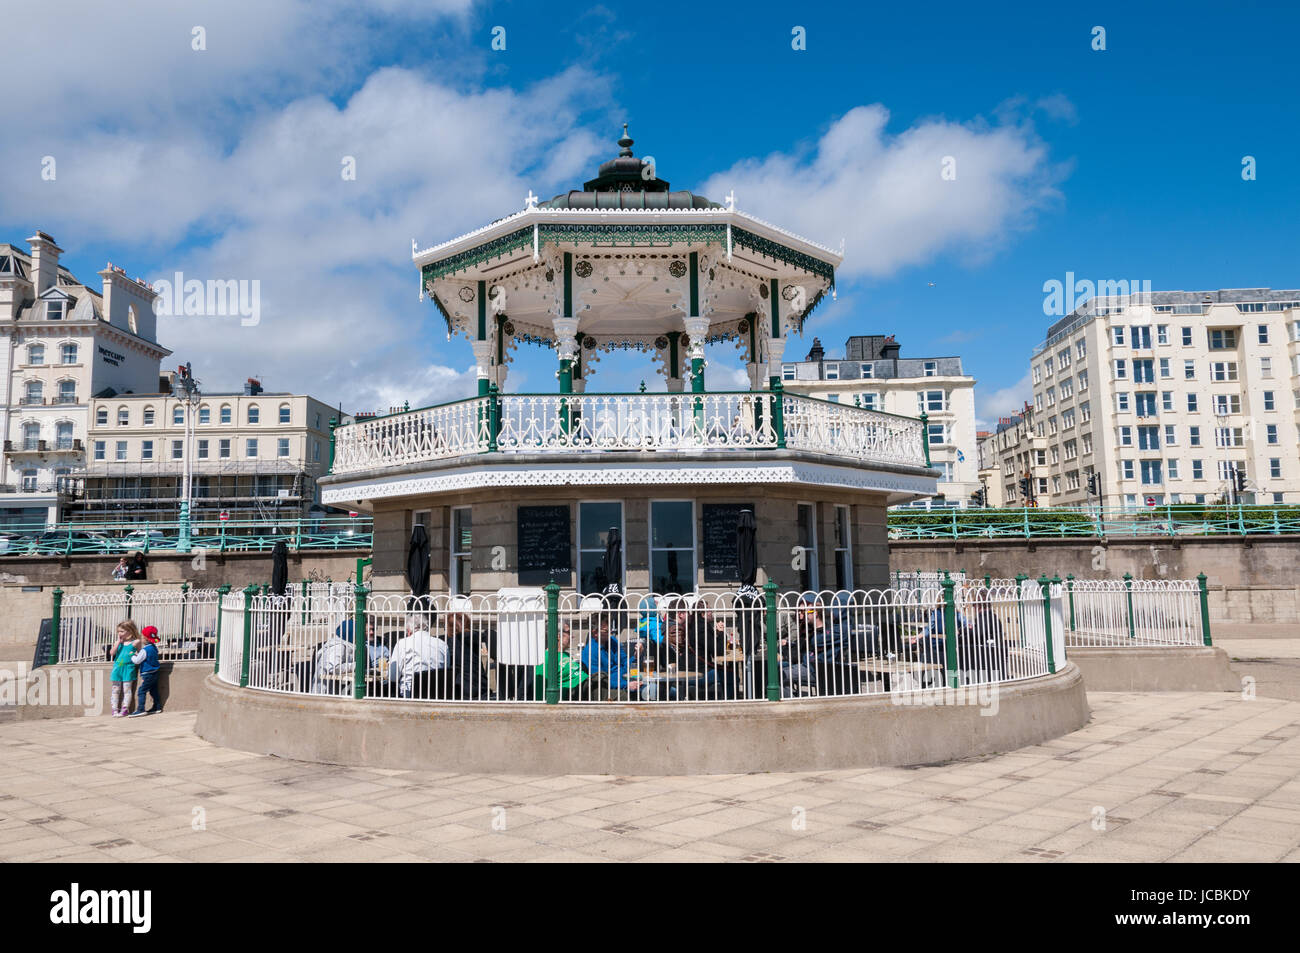 The Bandstand, Brighton seafront, United Kingdom Stock Photo